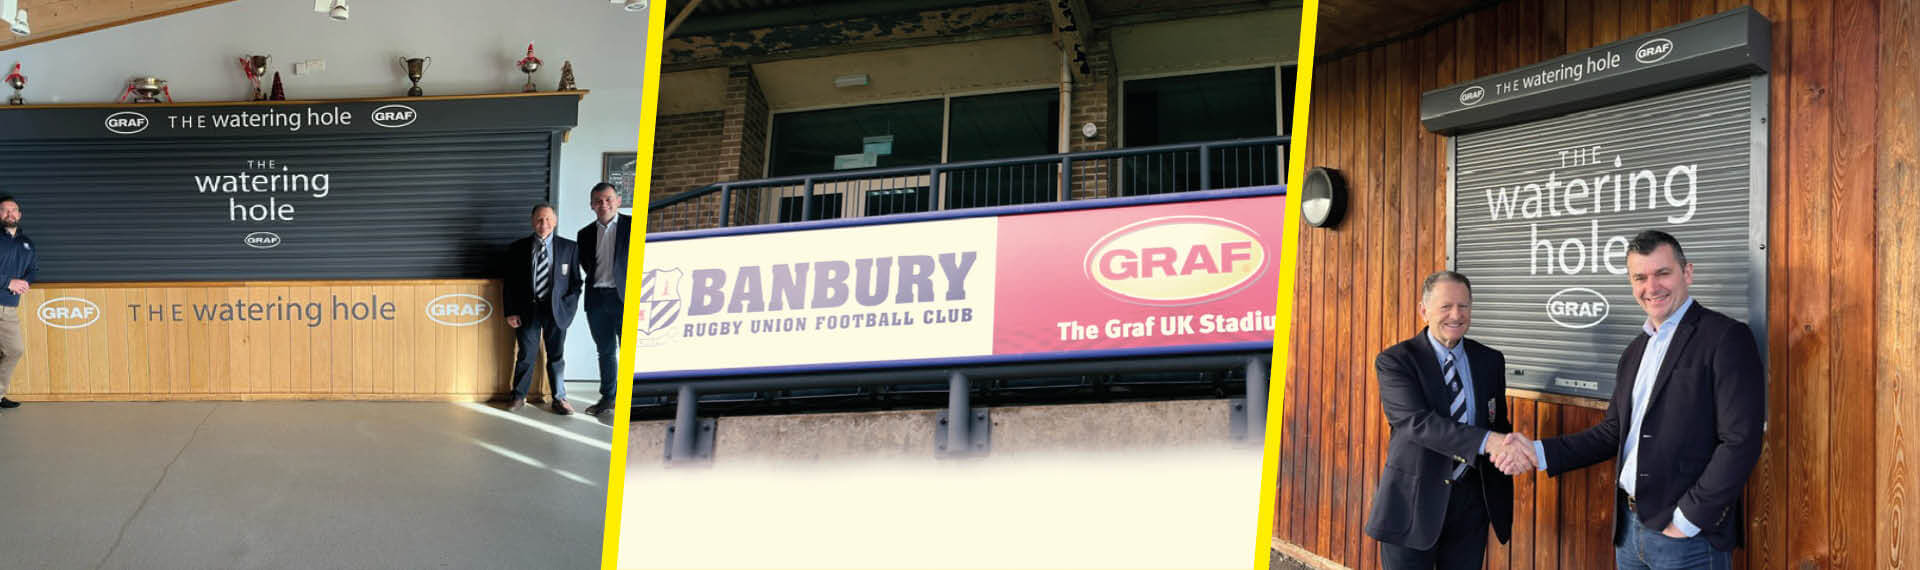 GRAF UK Ltd Announces Charitable Initiative with Banbury Rugby Union Football Club in Support of Katharine House Hospice